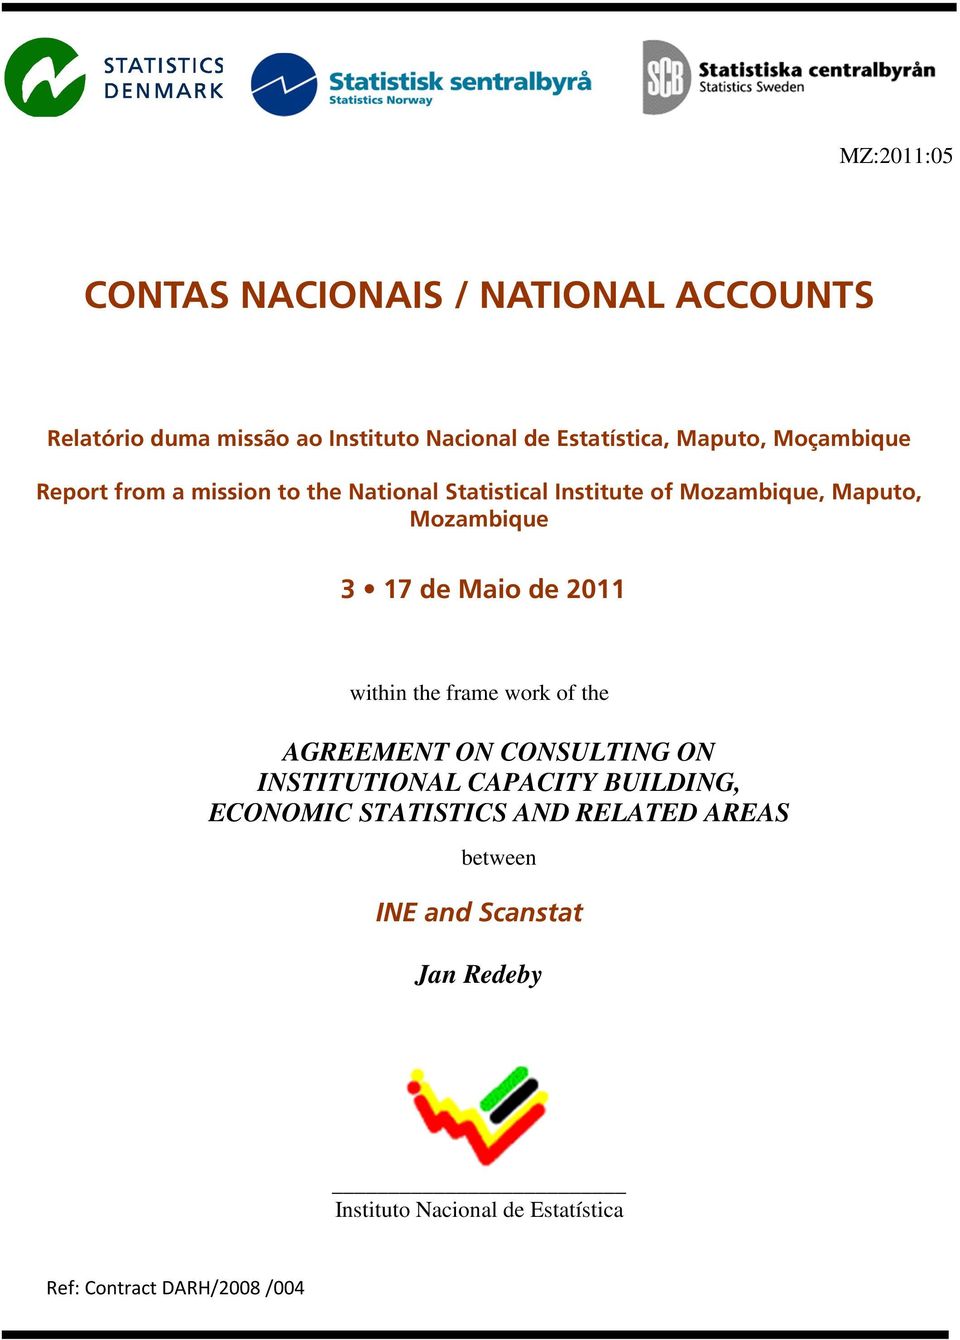 Maio de 2011 within the frame work of the AGREEMENT ON CONSULTING ON INSTITUTIONAL CAPACITY BUILDING, ECONOMIC